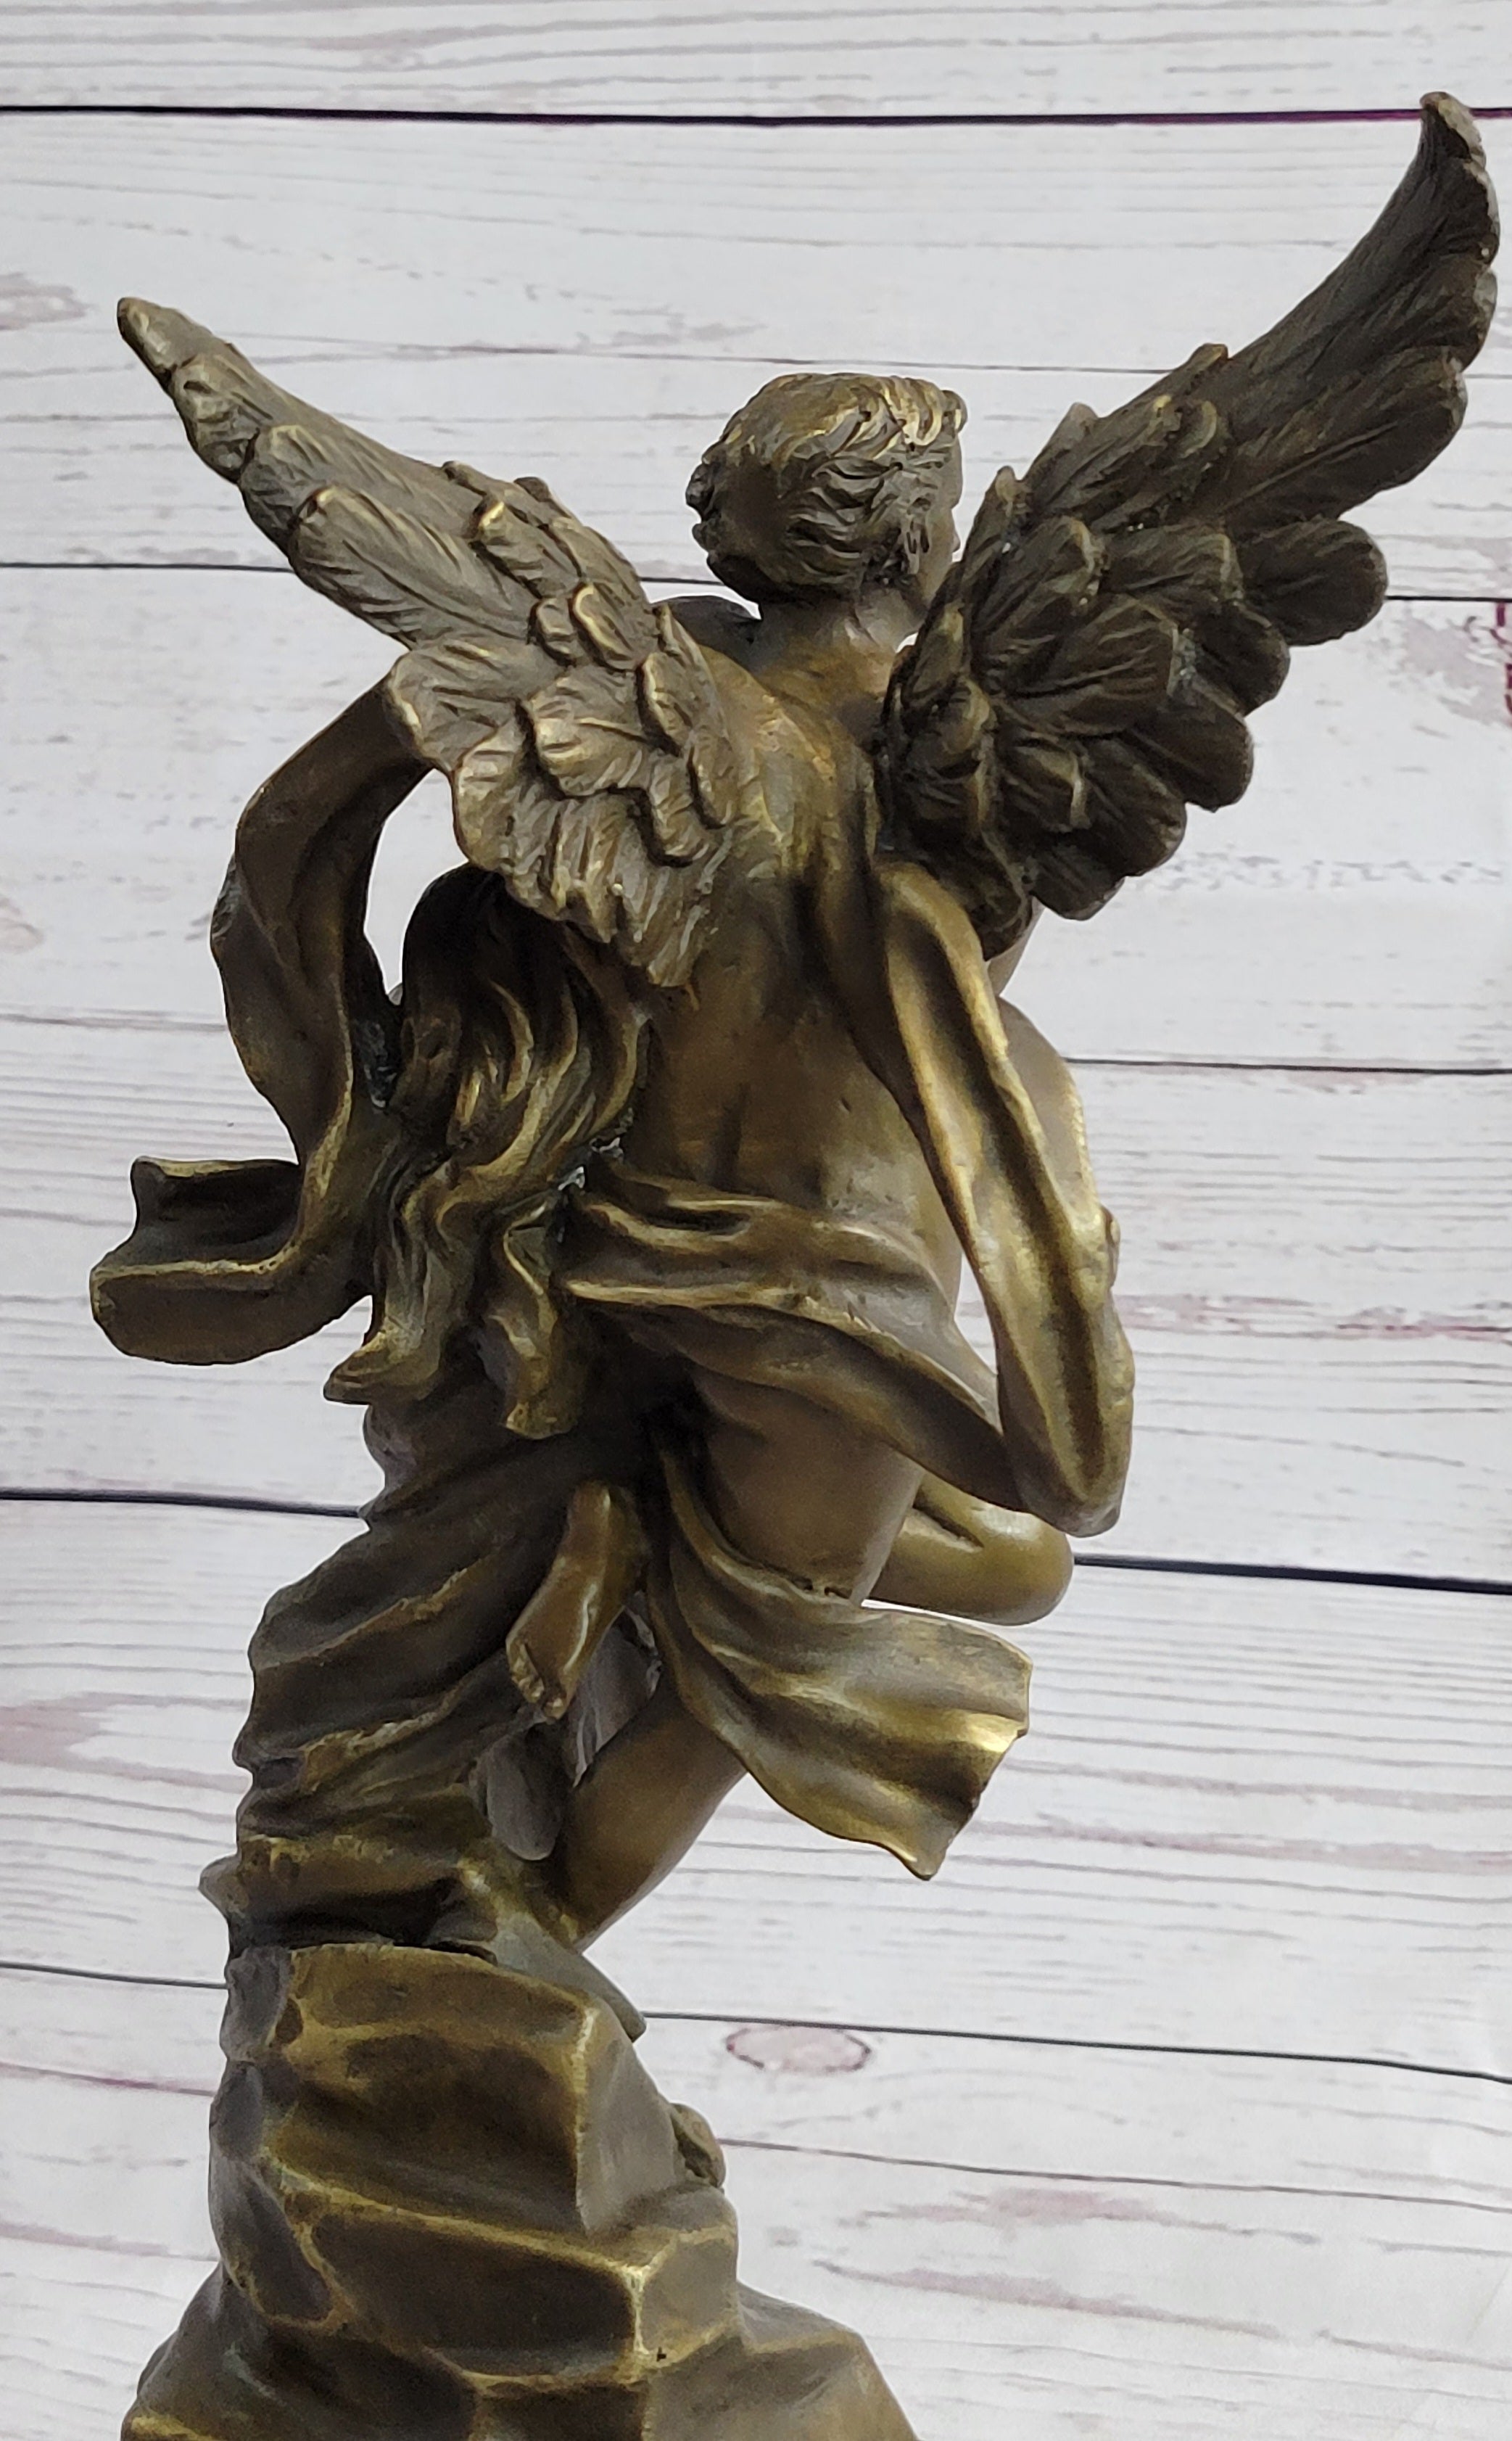 Bronze Sculpture Eros and Psyche For Valentine Day Gift Thoughtful Nude Figurine